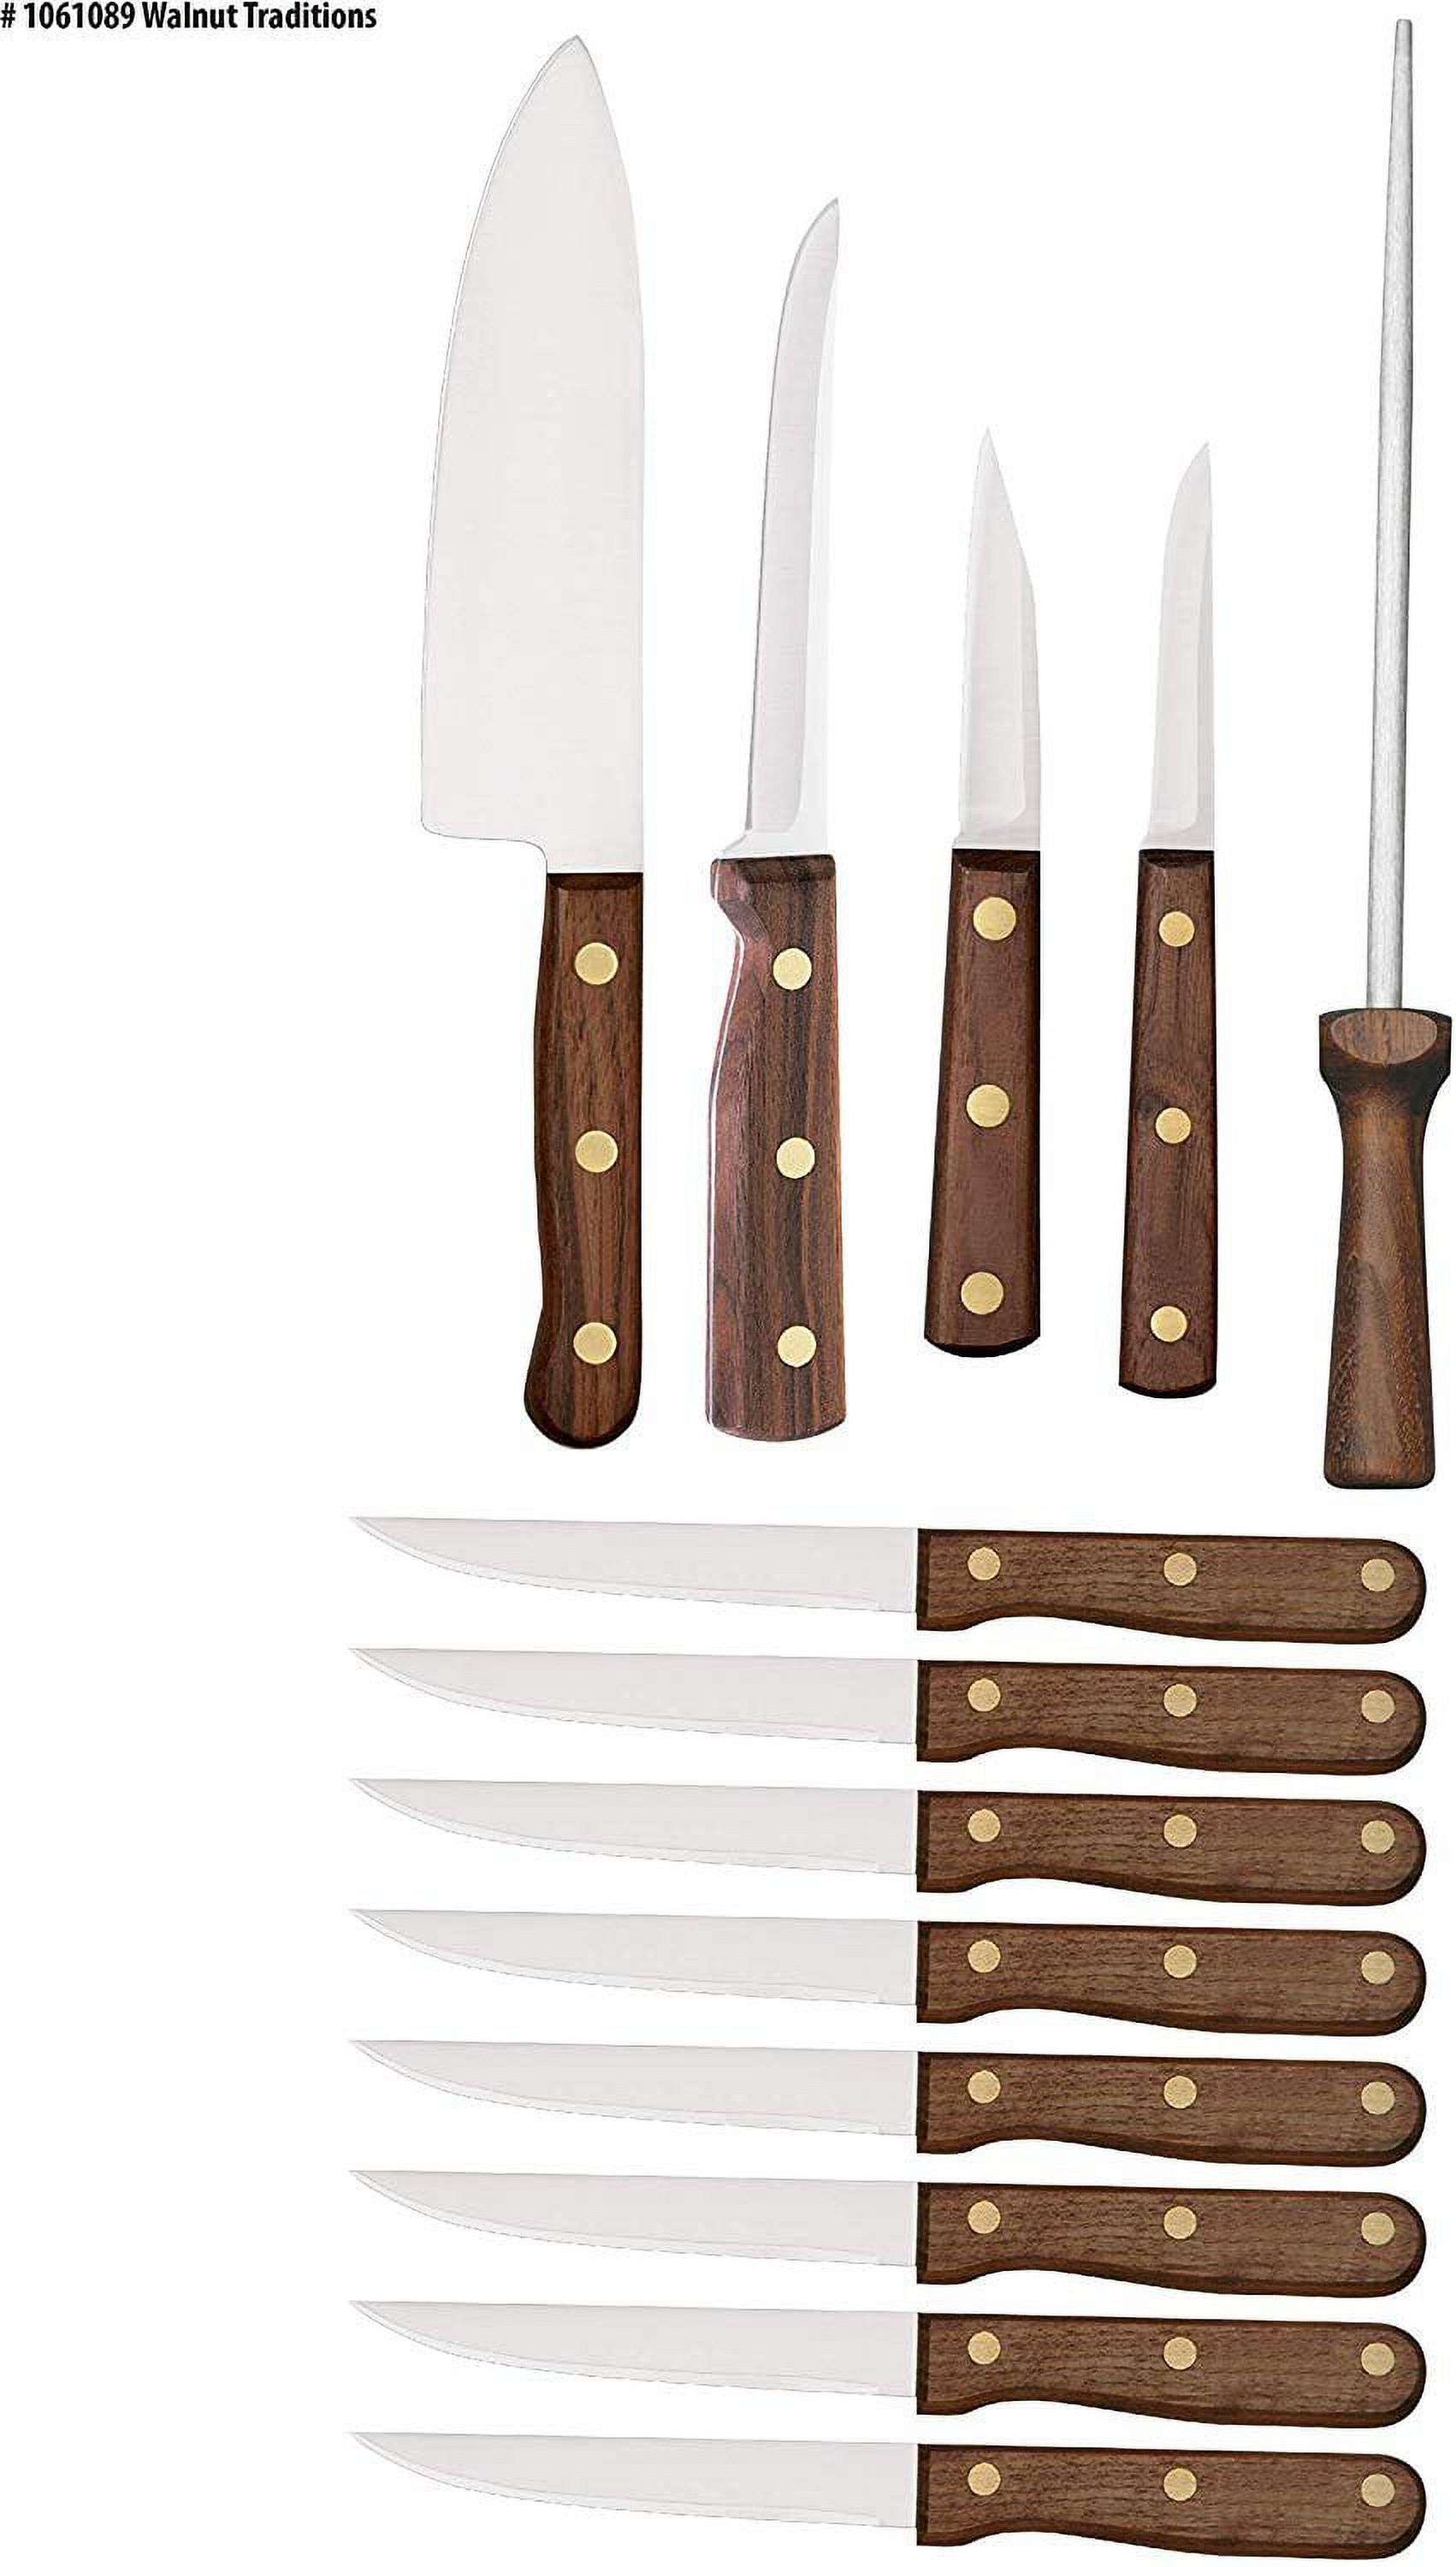 Chicago Cutlery 14Pc Wlnt Trad Knife Set - image 2 of 3